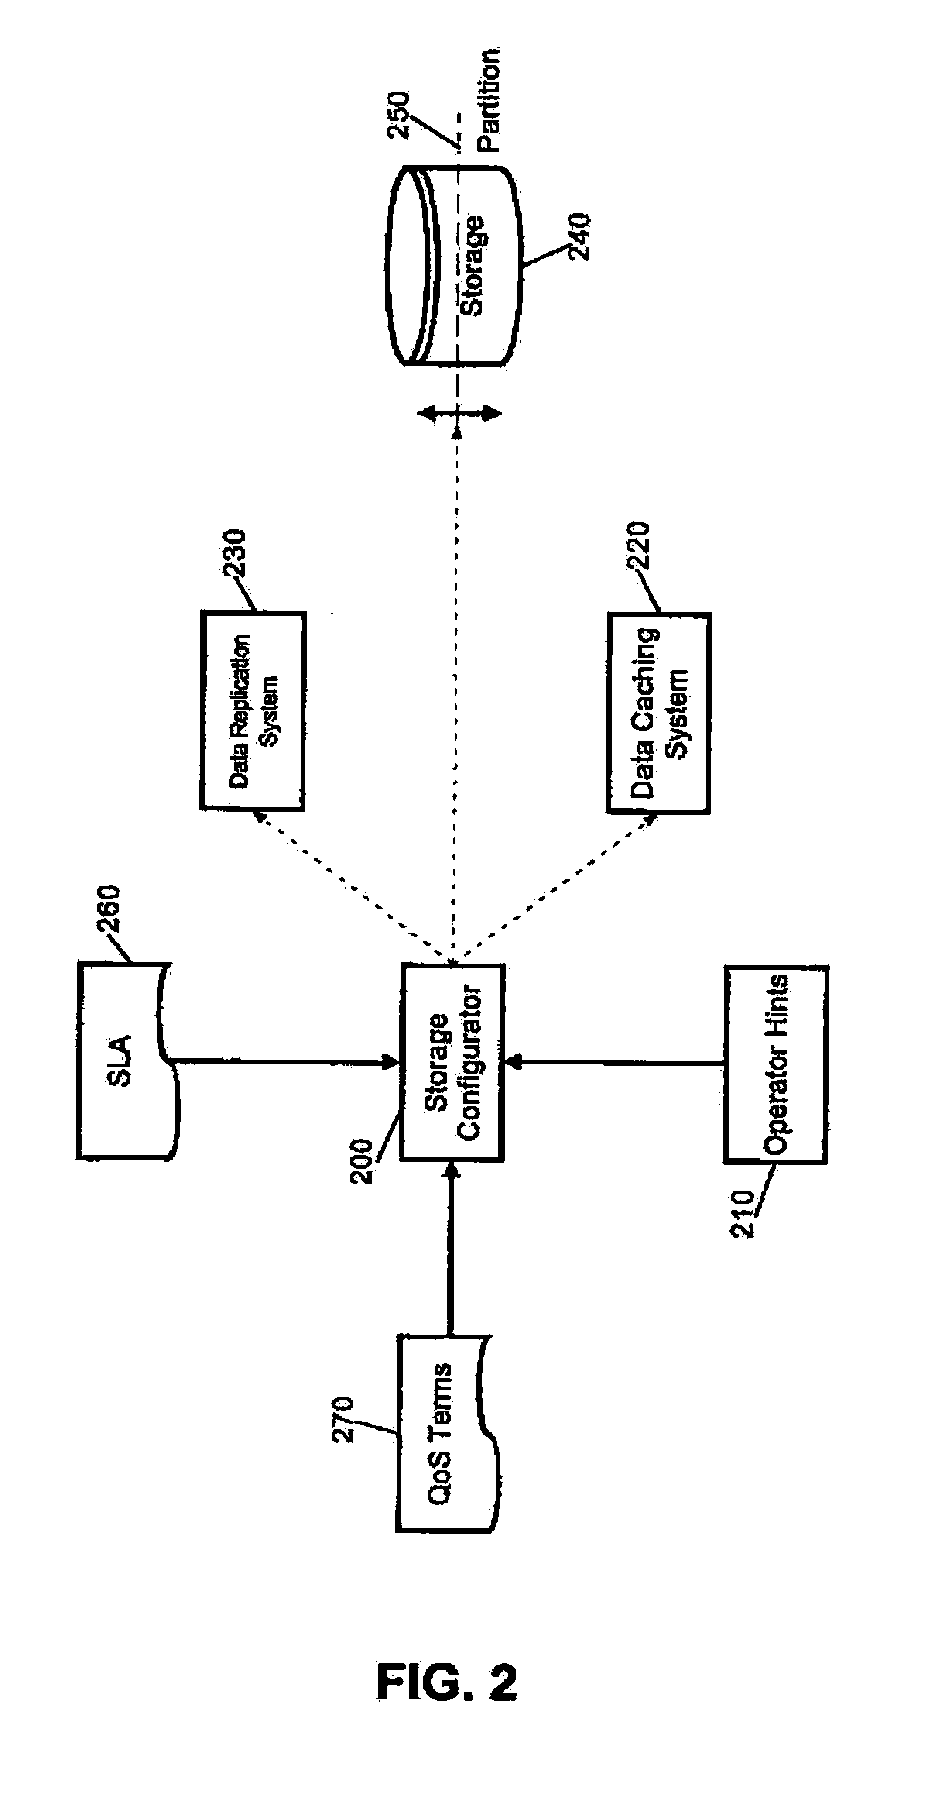 Enforcement of service terms through adaptive edge processing of application data